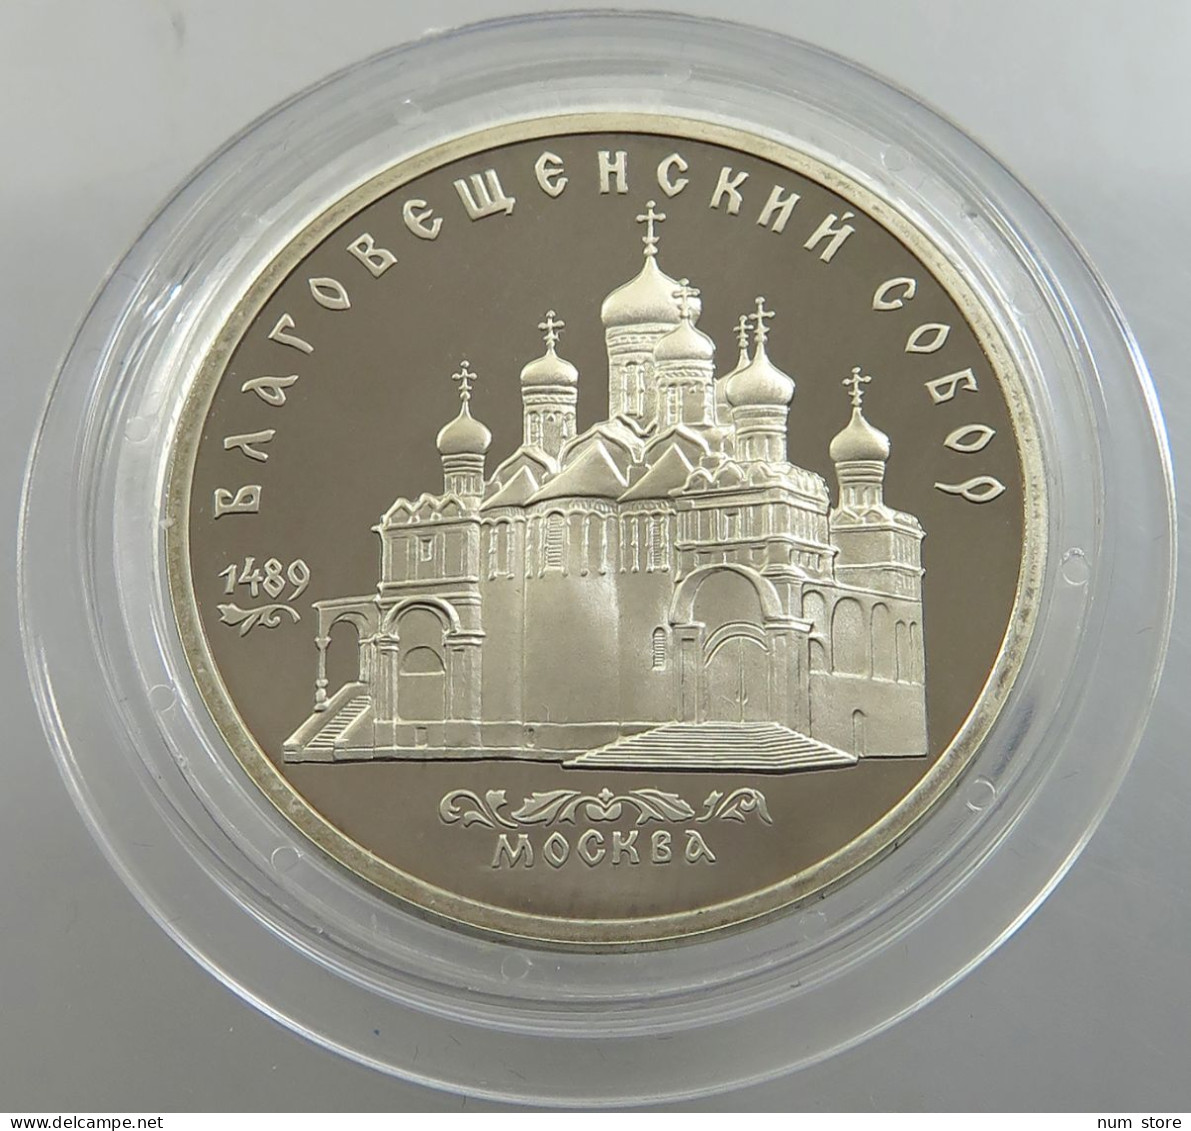 RUSSIA USSR 5 ROUBLES 1989 PROOF #sm14 0391 - Russie